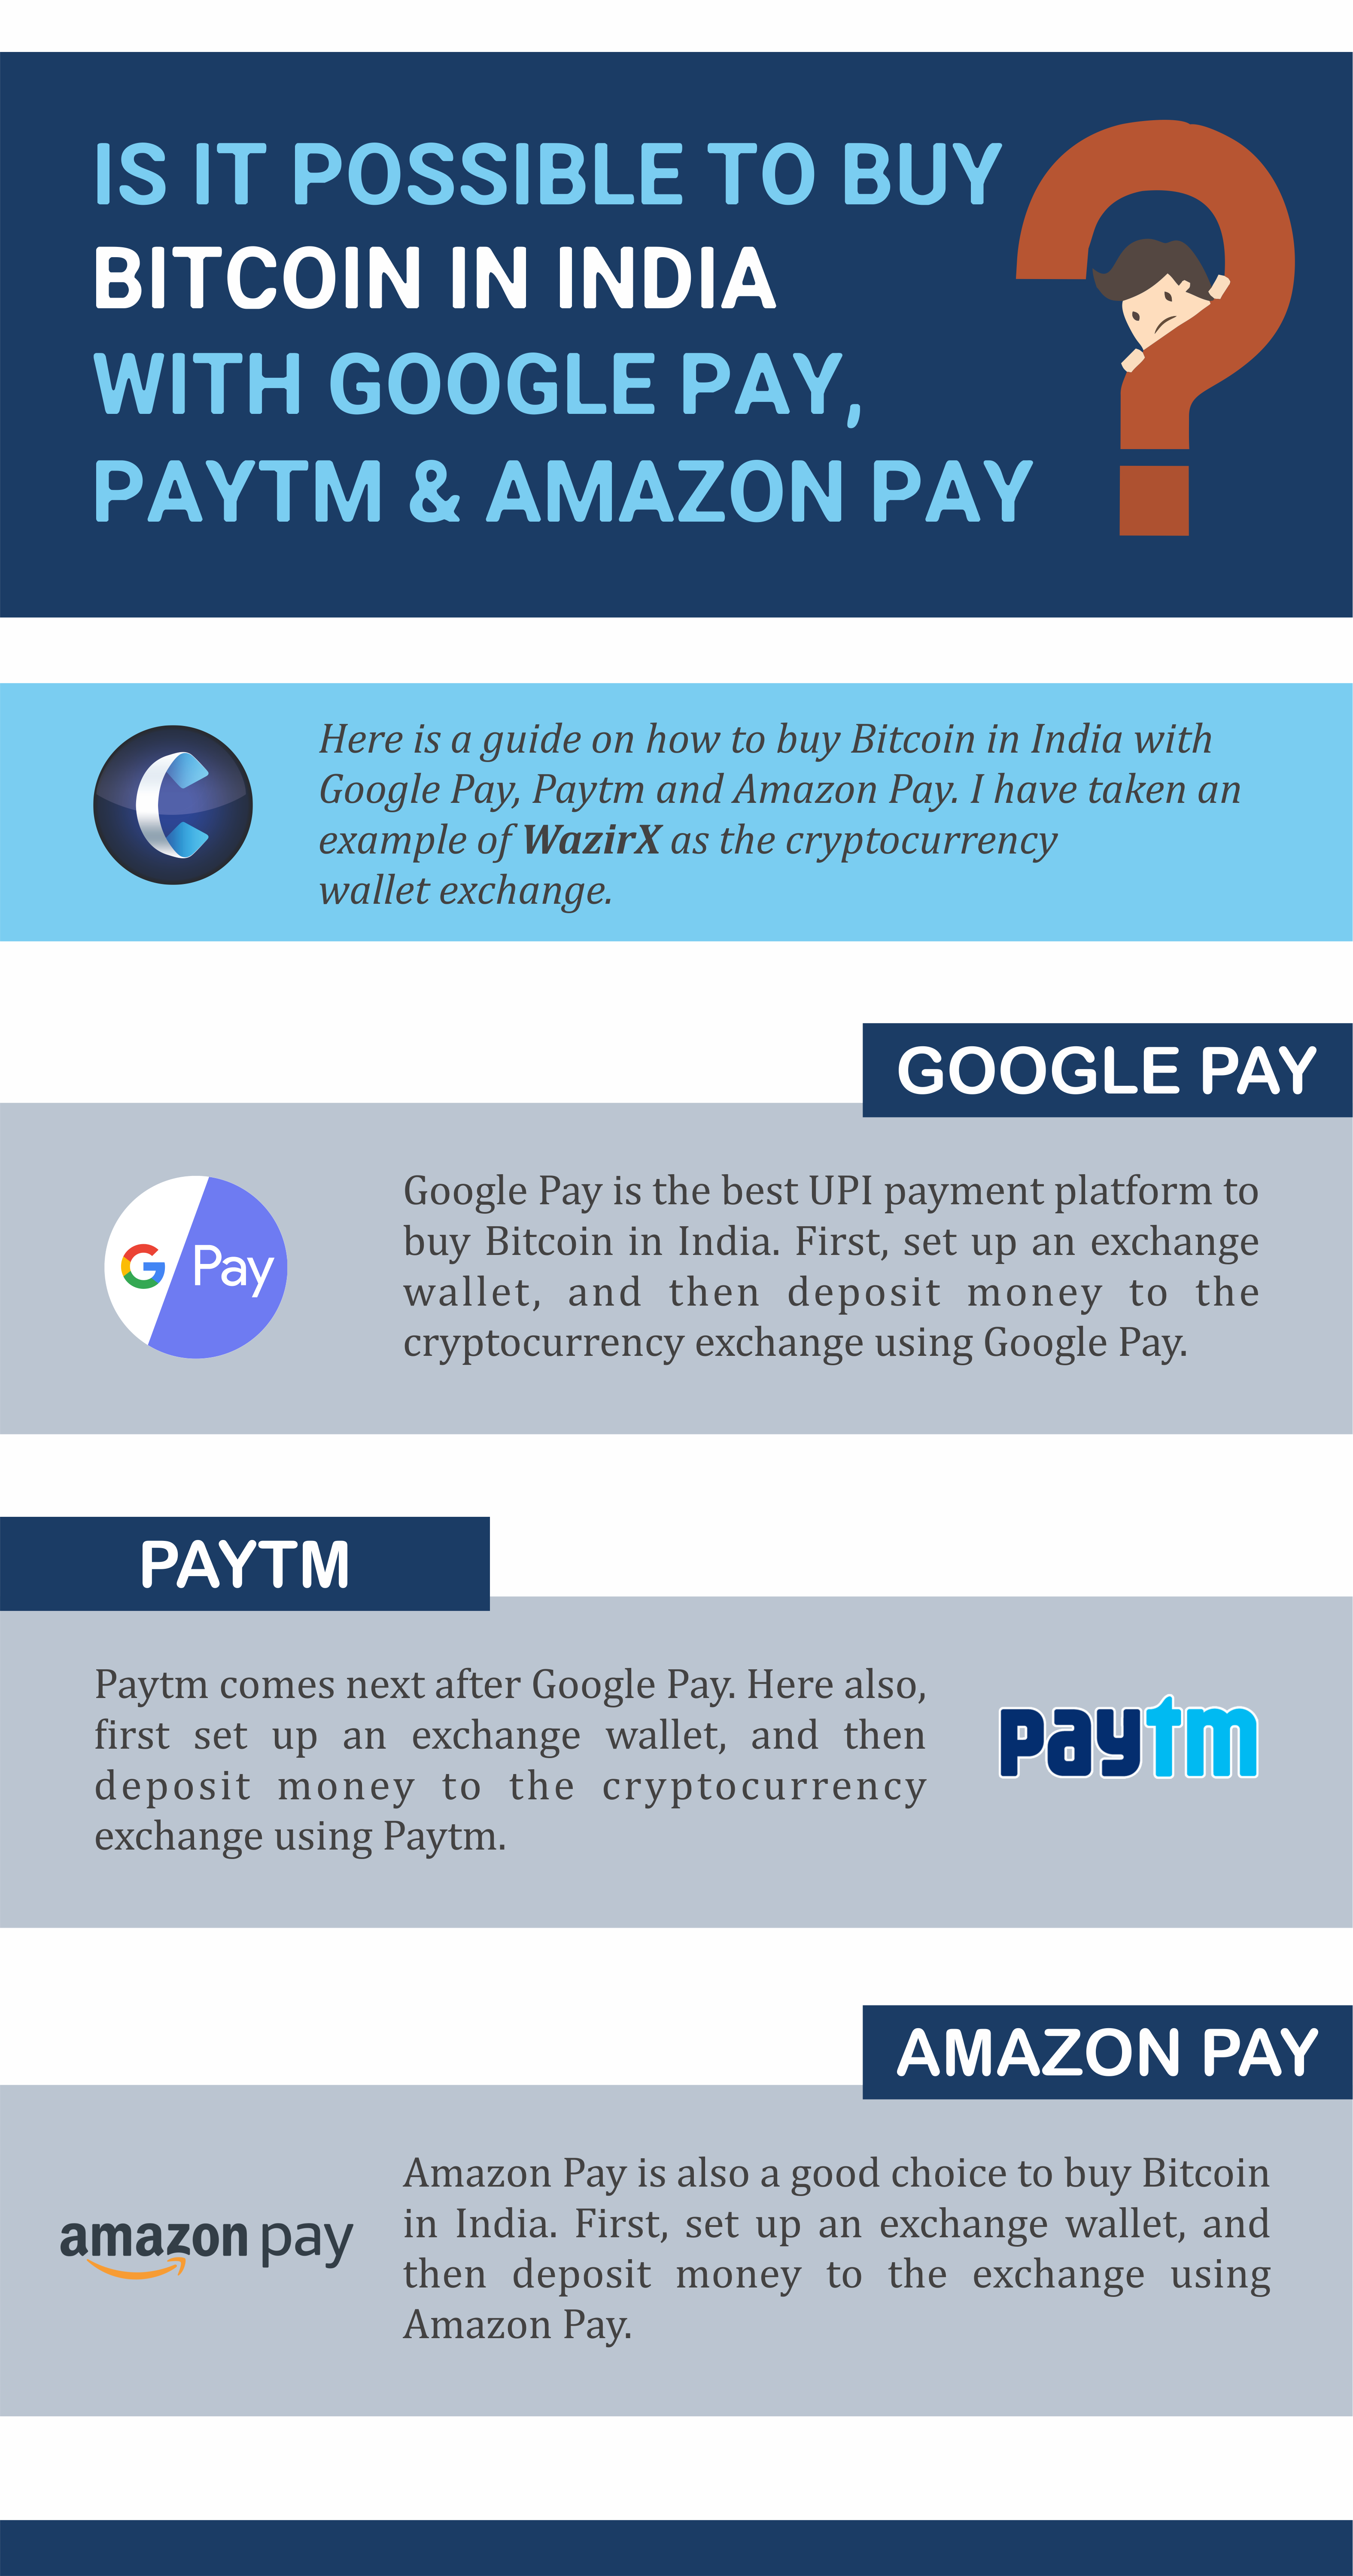 How to Buy Bitcoin in India: Disclaimers and The Full How-To